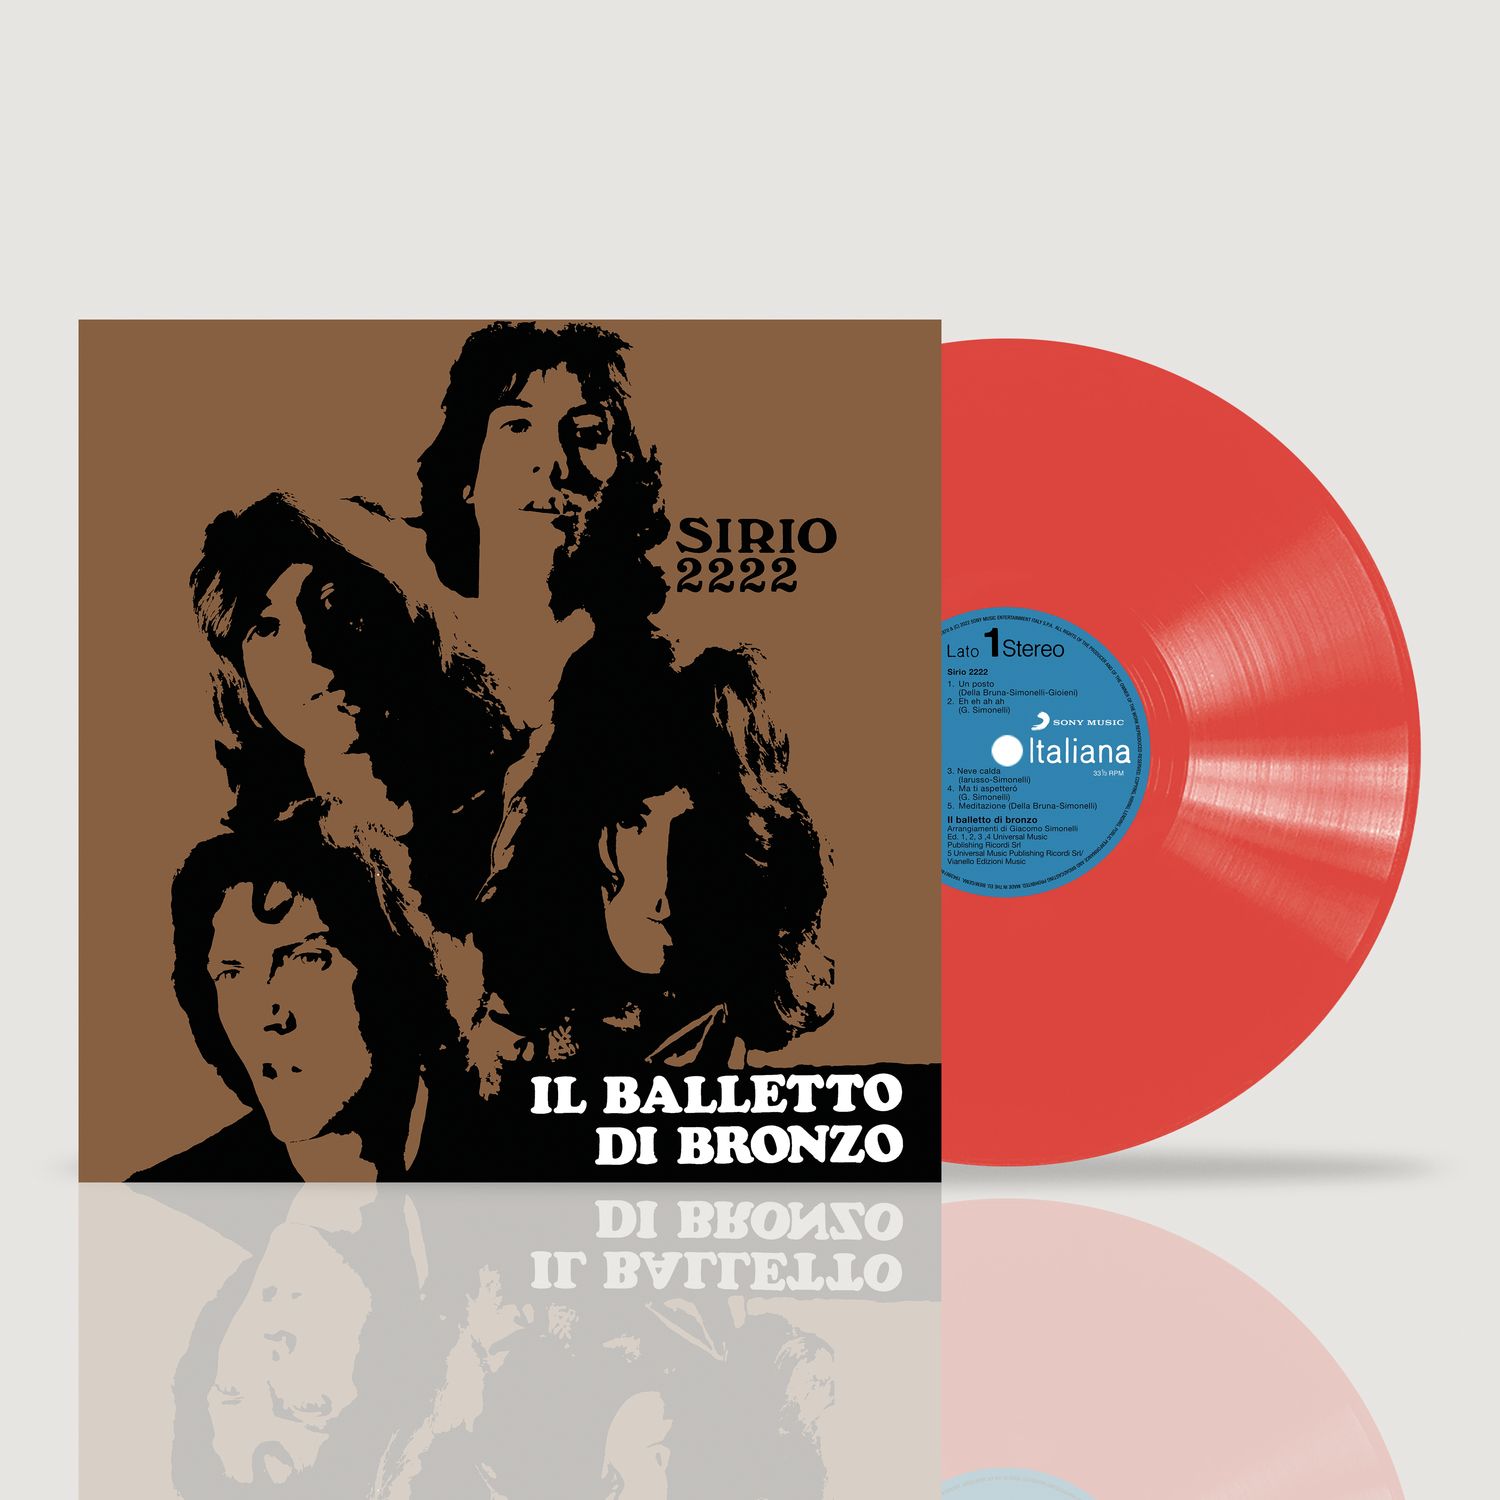 SIRIO 2222 (180 GR LIMITED NUMBERED RED VINYL EDITION)